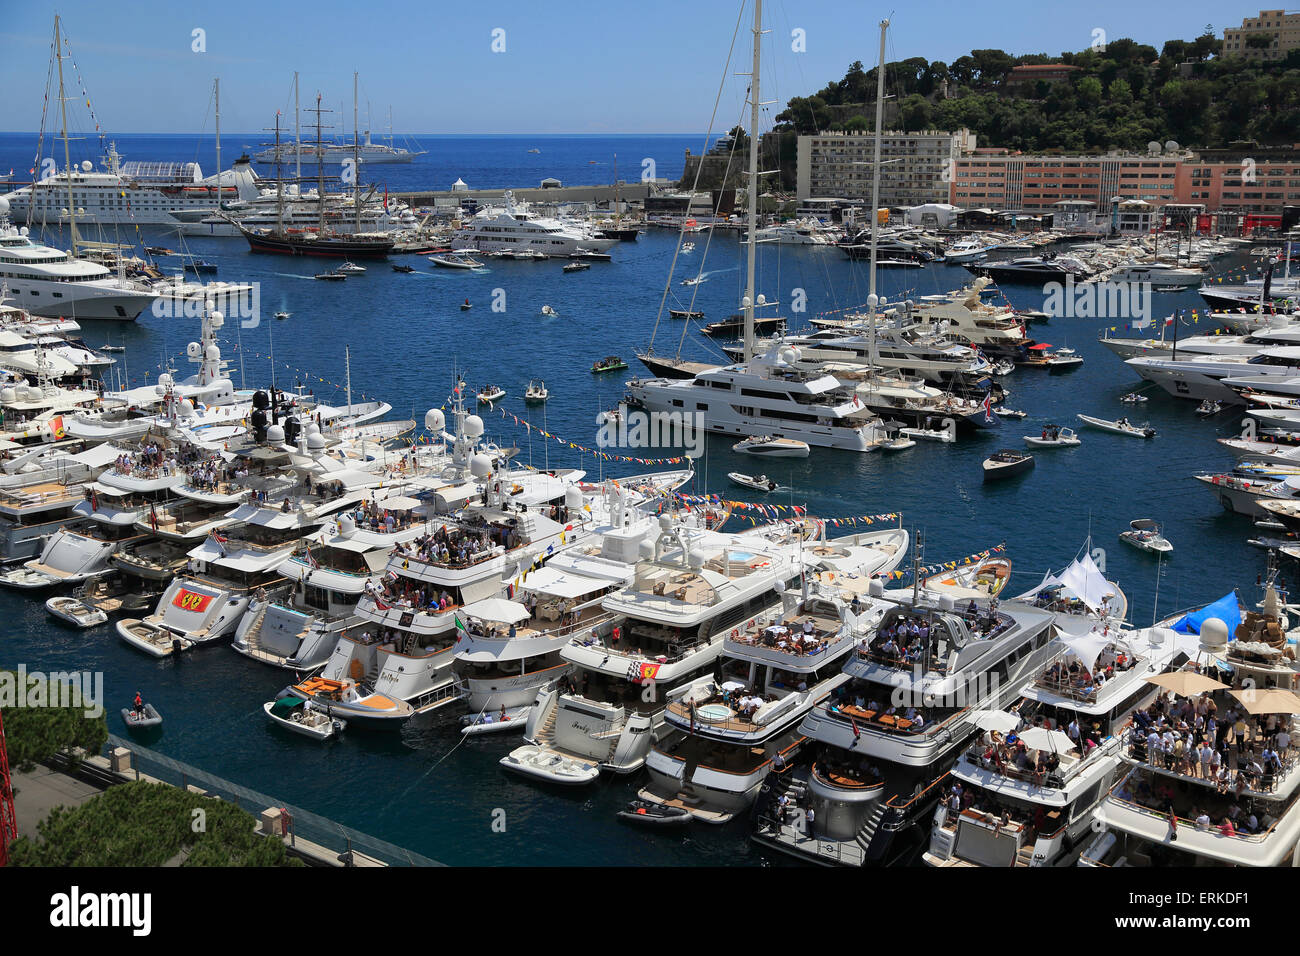 View of Port Hercule with yachts and cruise ships during the Formula 1 Grand Prix 2015, Principality of Monaco Stock Photo